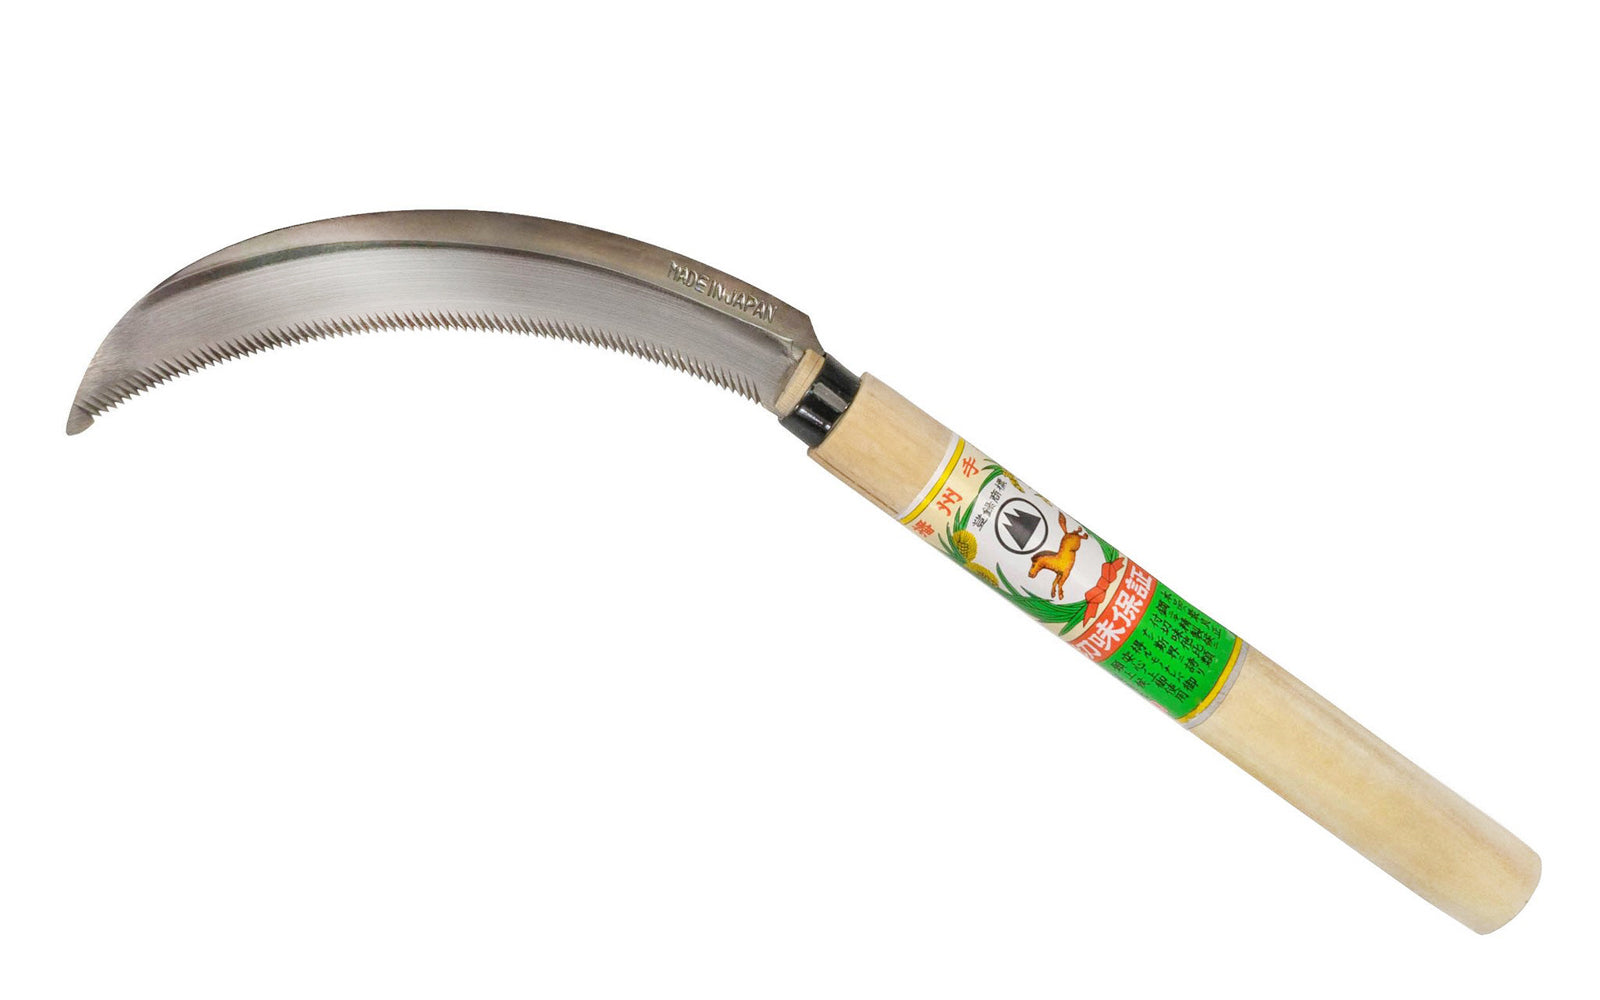 Traditional Japanese Nokogama Sickle-Saw great for outdoor landscaping needs. Made of high carbon steel, the blade of this weeder is very sharp with aggressive teeth & the blade is slightly curved for fast aggressive cutting. Noko Gama hand sickle will cut grasses, tough weeds, sod & turf, roots, stems. Made in Japan